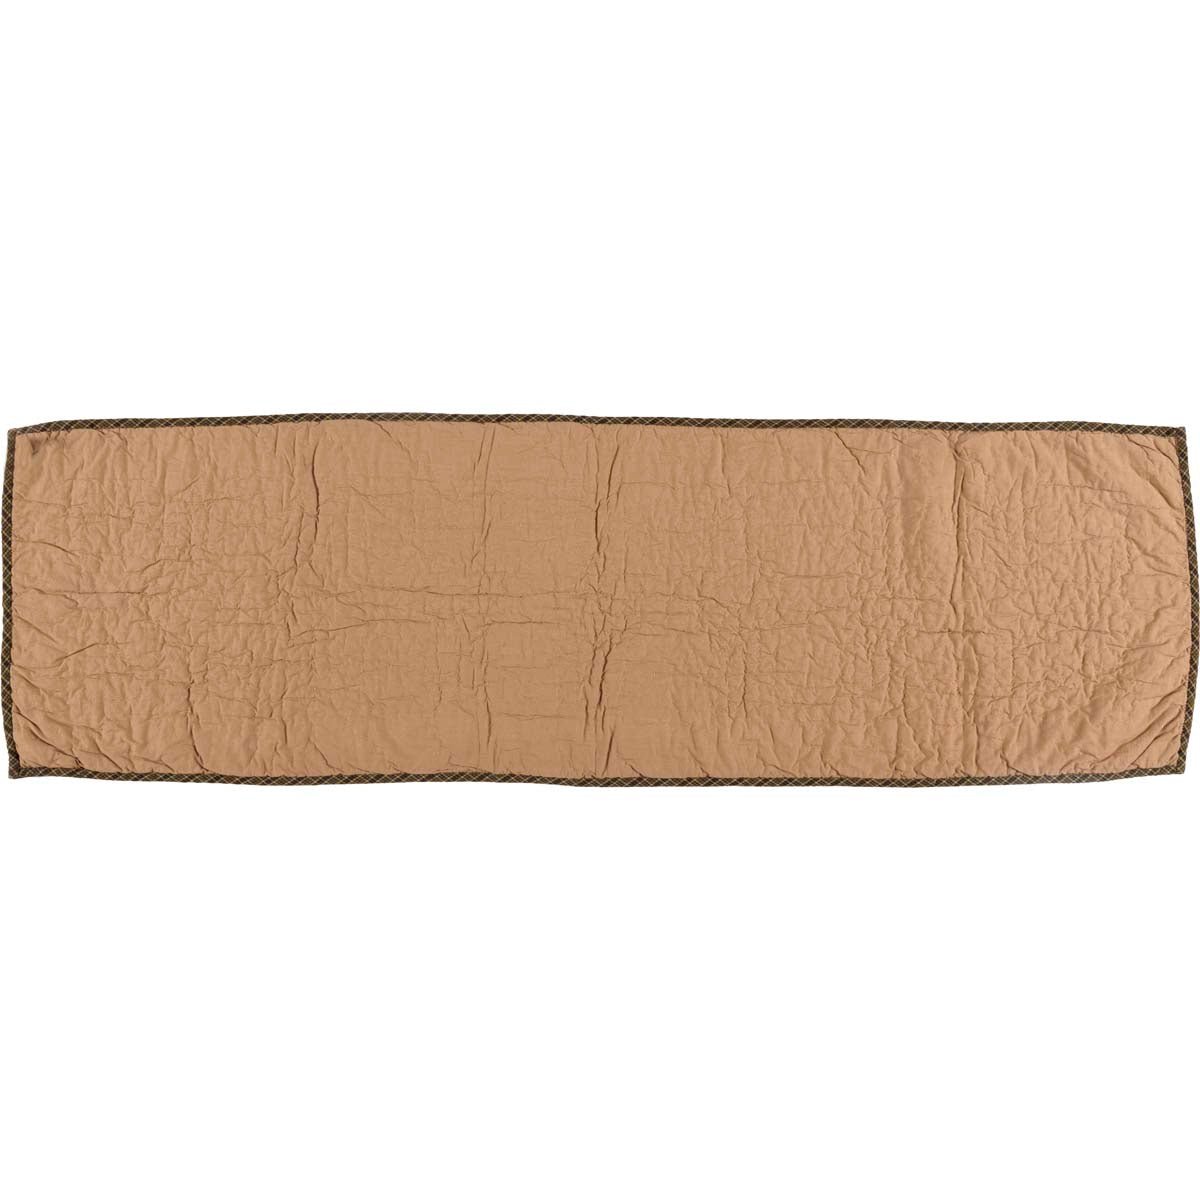 Oak & Asher Tea Cabin Runner Quilted 13x48 By VHC Brands